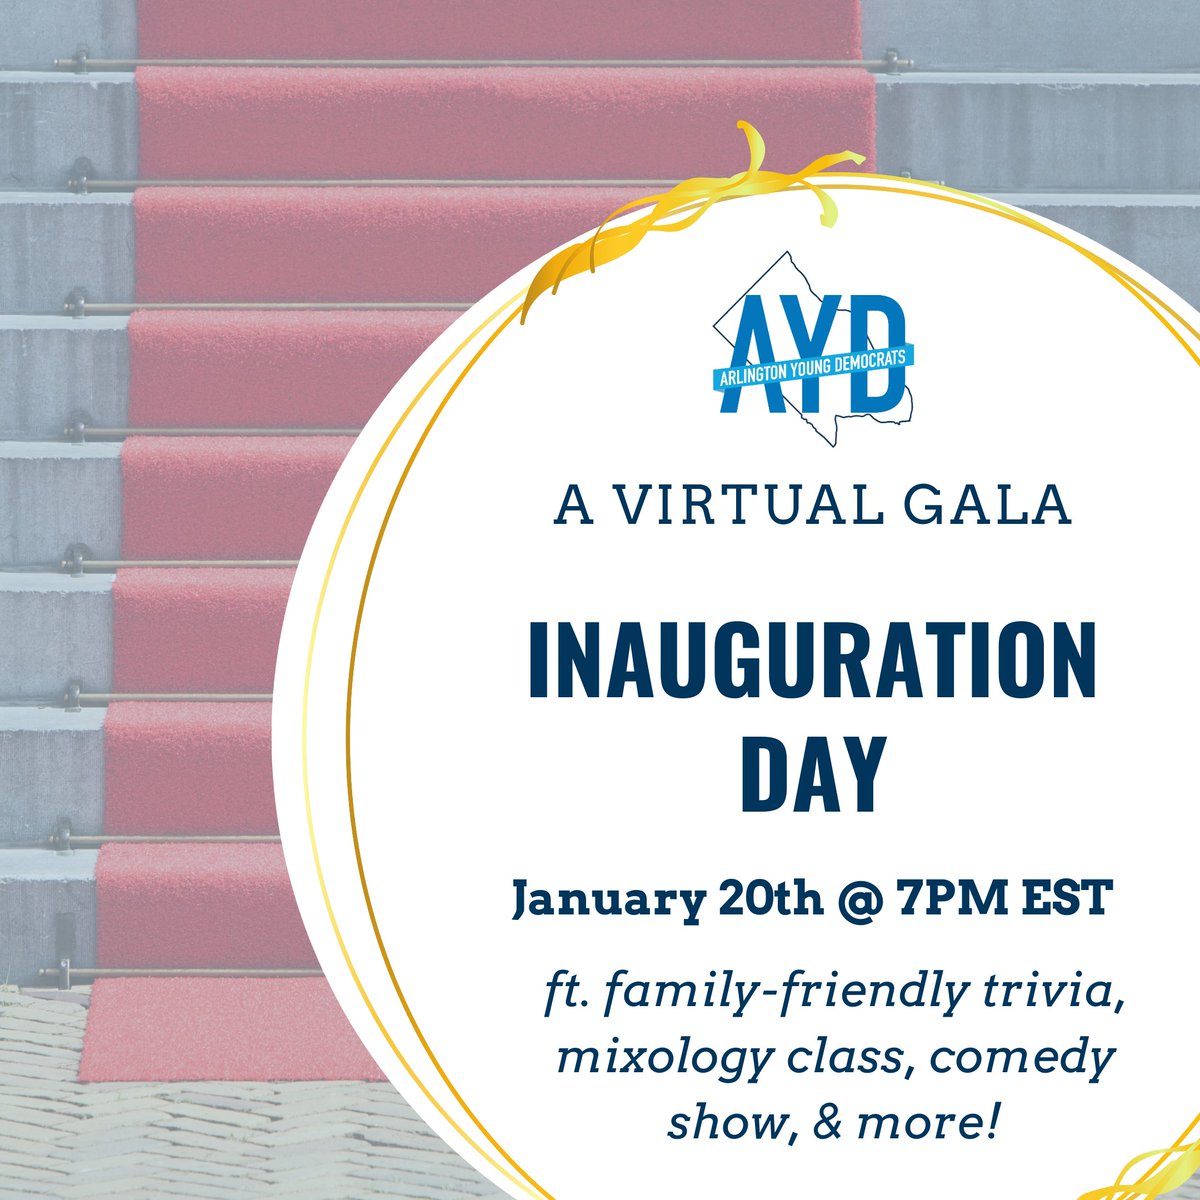 If you are looking for place to hang out for the #Inauguration2021, join the #Arlingtonyoungdems for a #virtualgala. Register here: fb.me/e/1Q9PQRVse